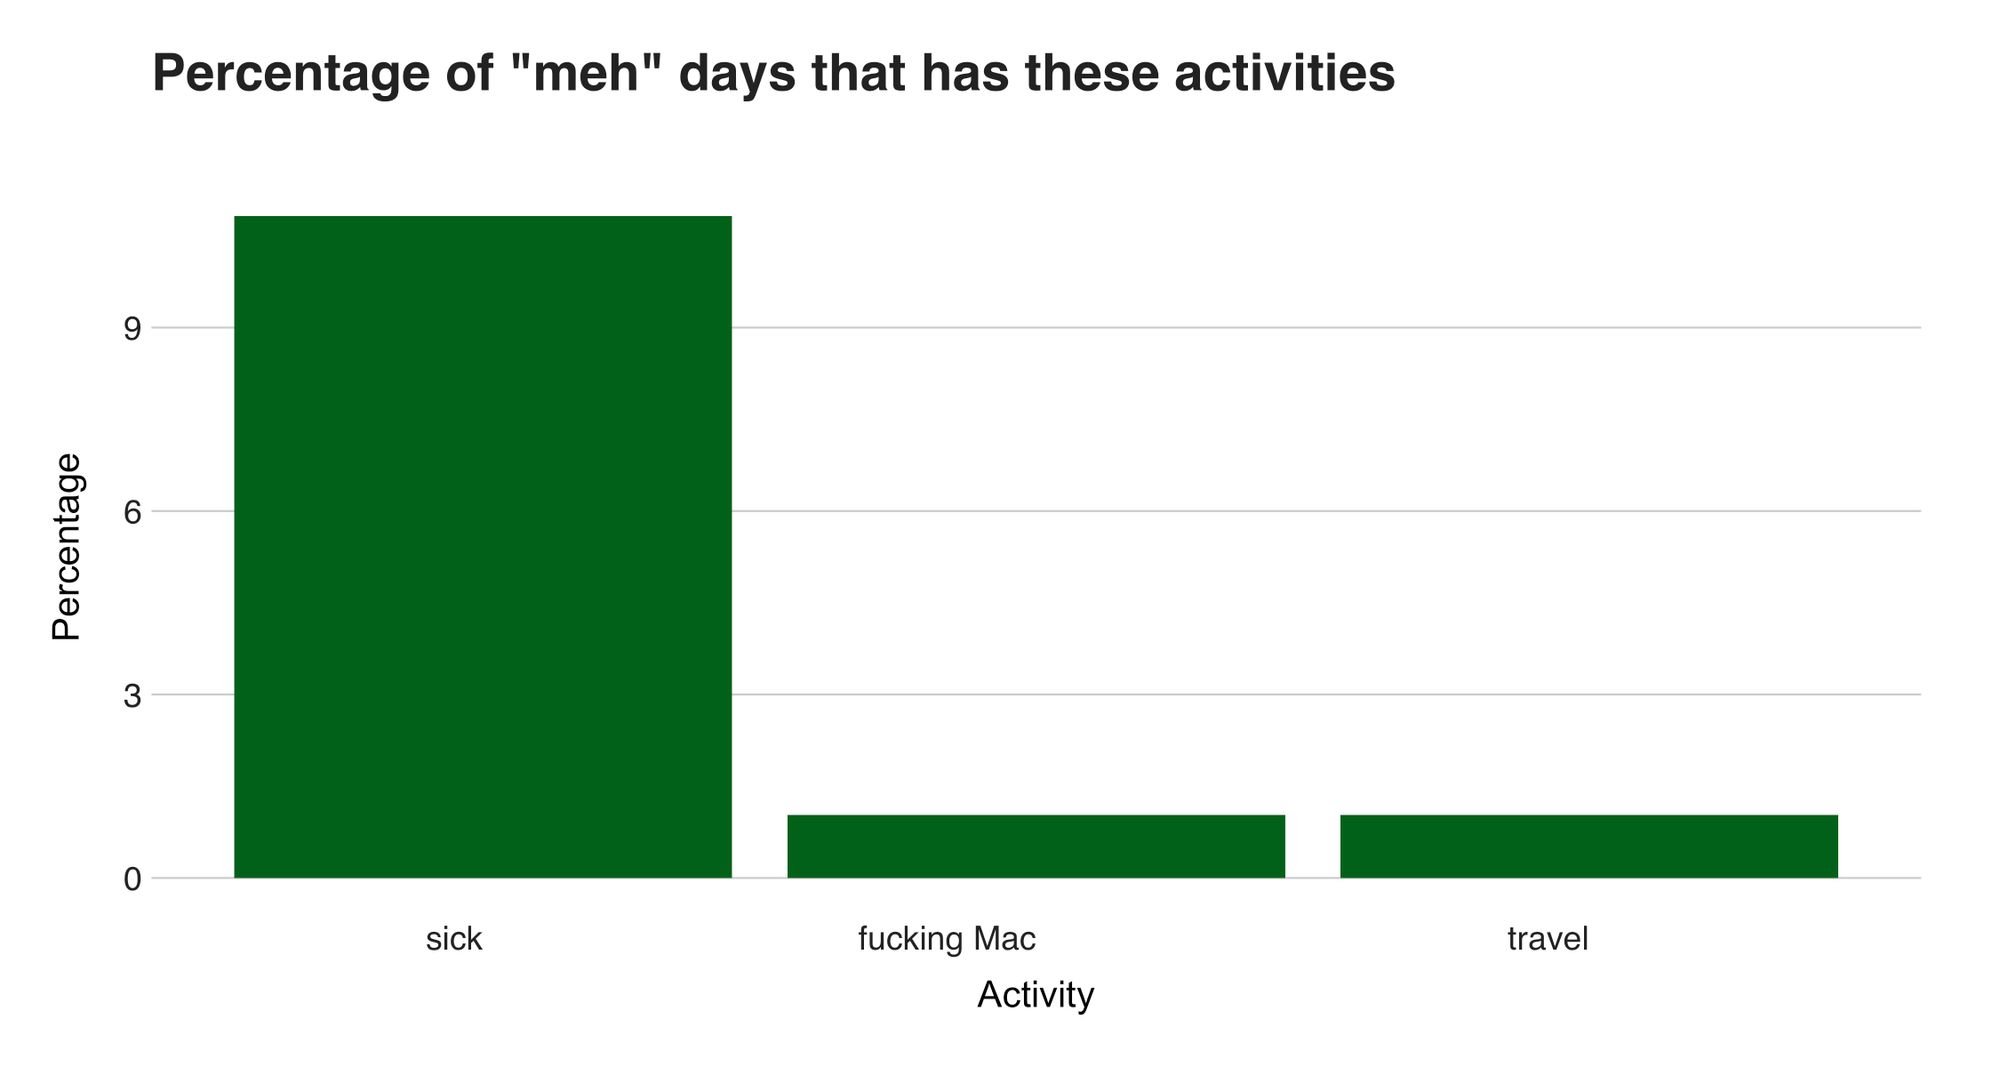 Figure 19: Percentage of "meh" days with these activities.